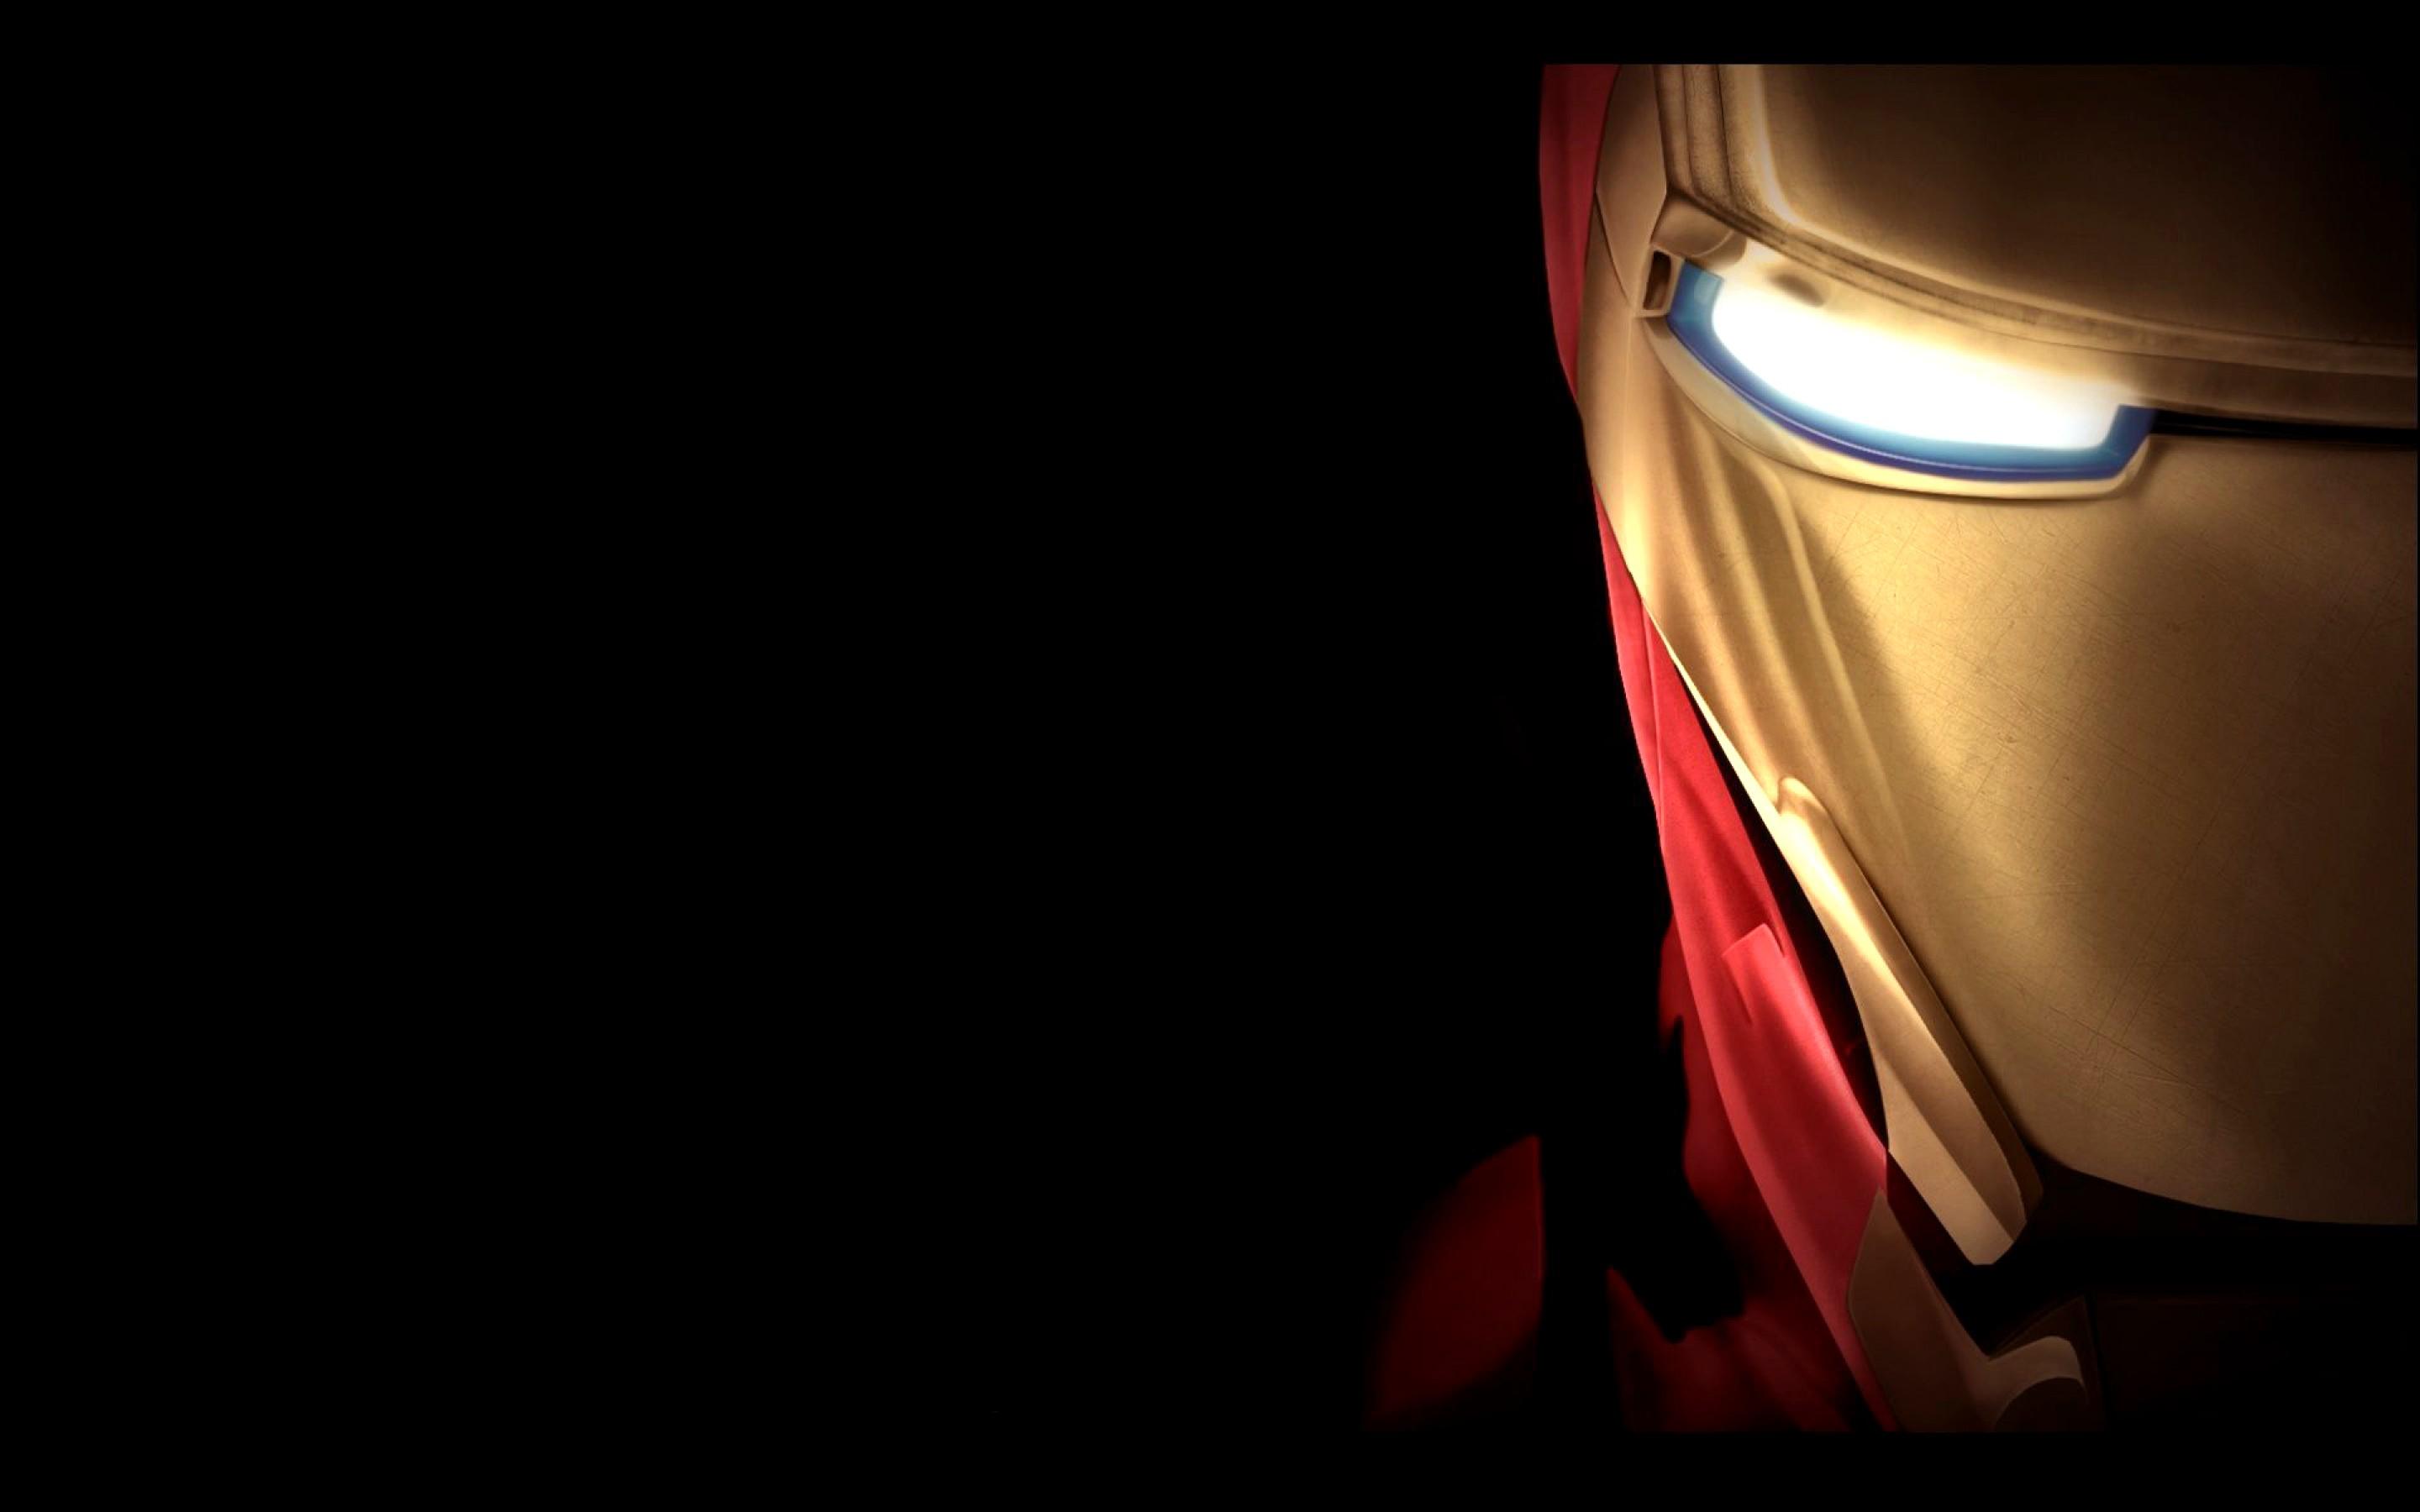 Cool Wallpaper with Iron Man Mask (Face Image) in Close Up and Dark